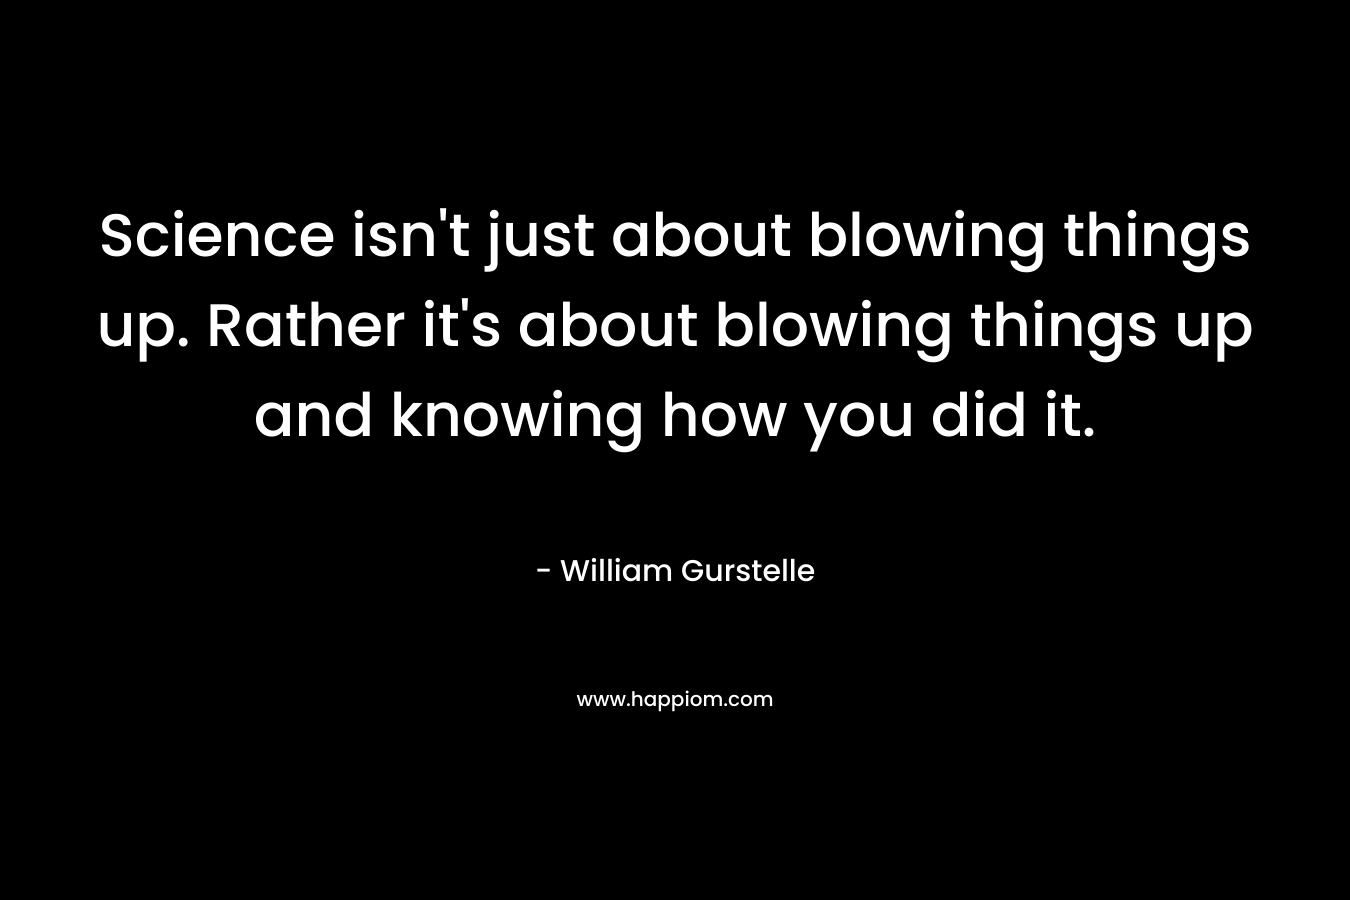 Science isn't just about blowing things up. Rather it's about blowing things up and knowing how you did it.